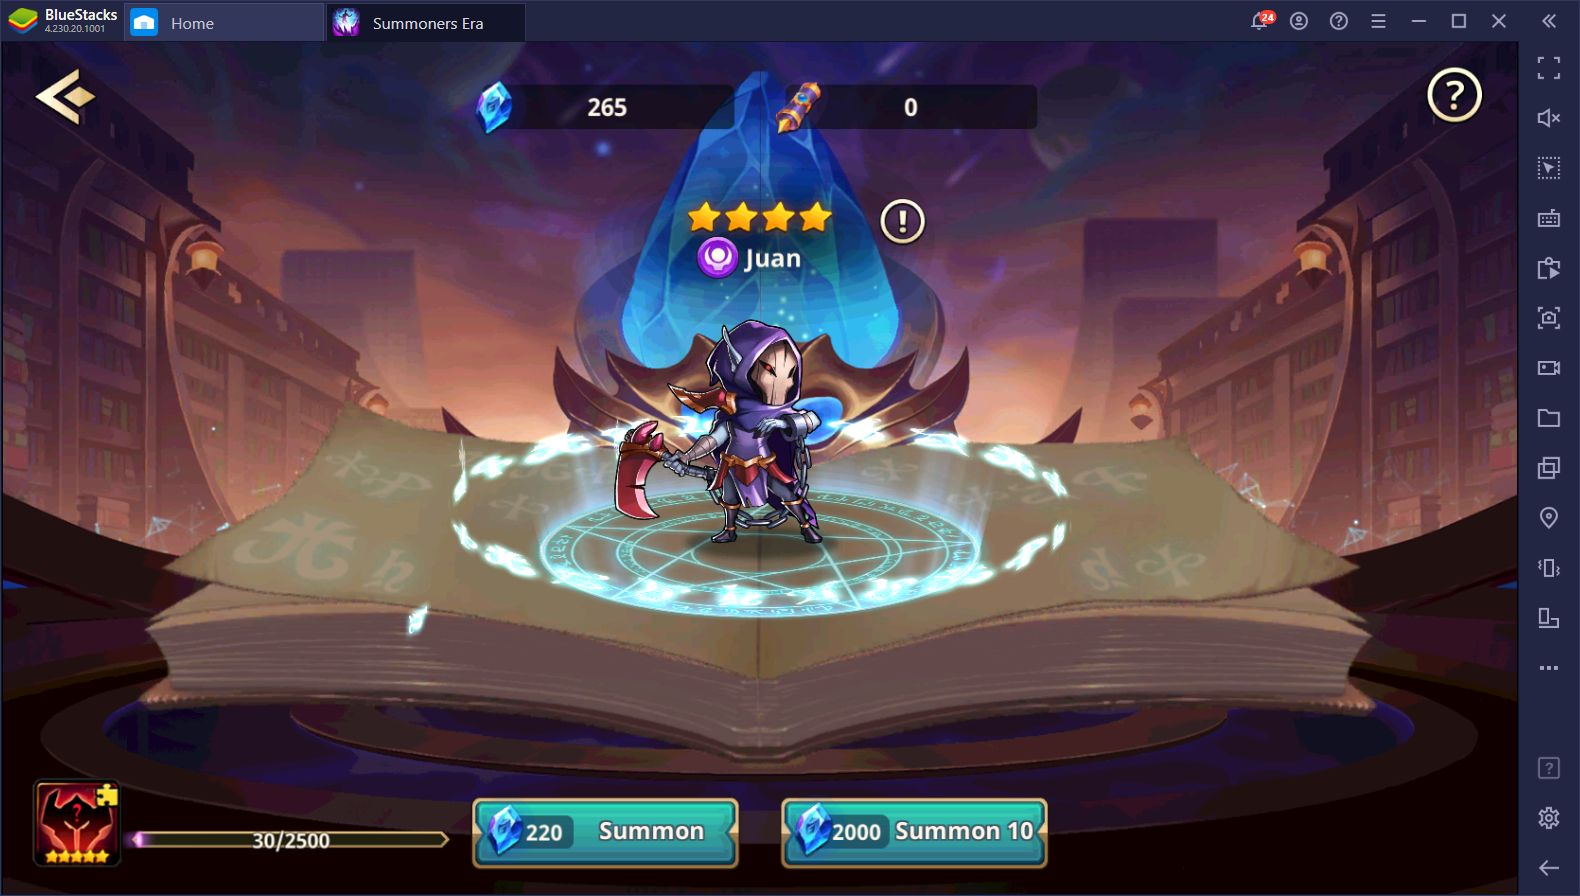 Summoners Era – The Best Tips, Tricks, Cheats, and Strategies to Get Godlike at the Game